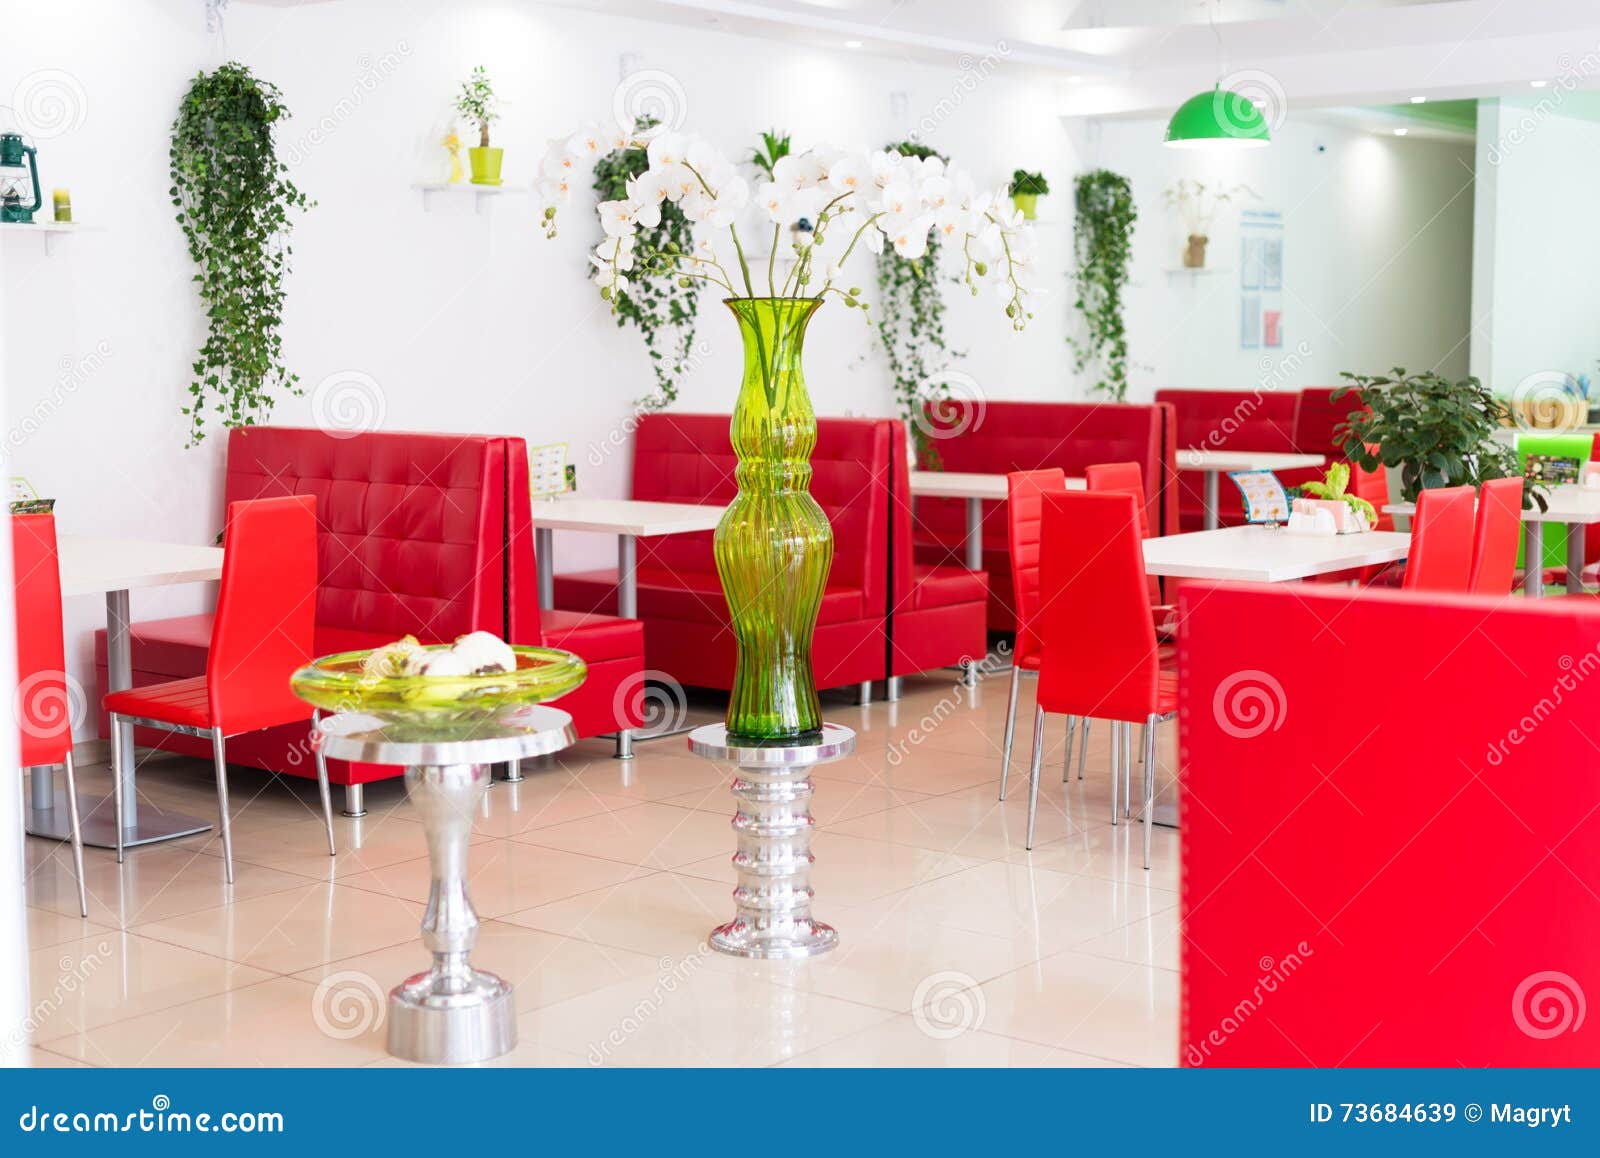 Modern Design Restaurant Interior In White And Red Colors